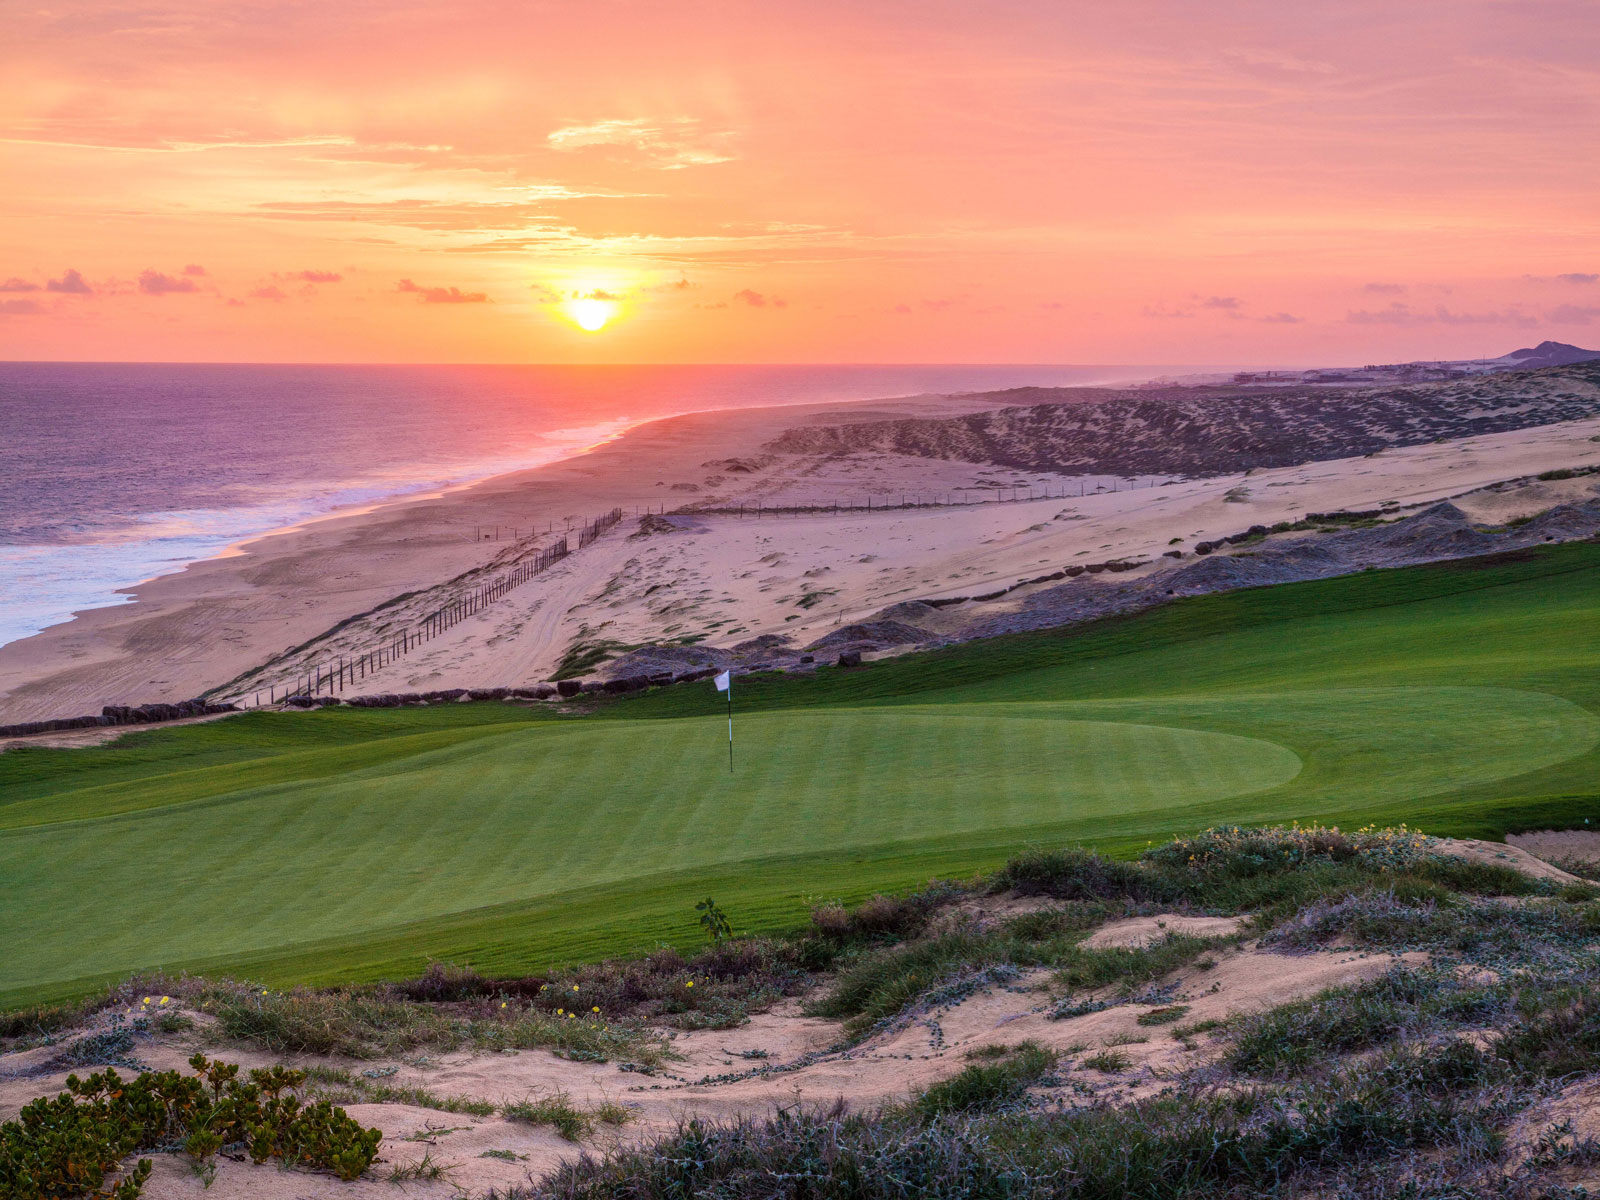 Los Cabos - Mexico’s Must-Play, Golf Paradise